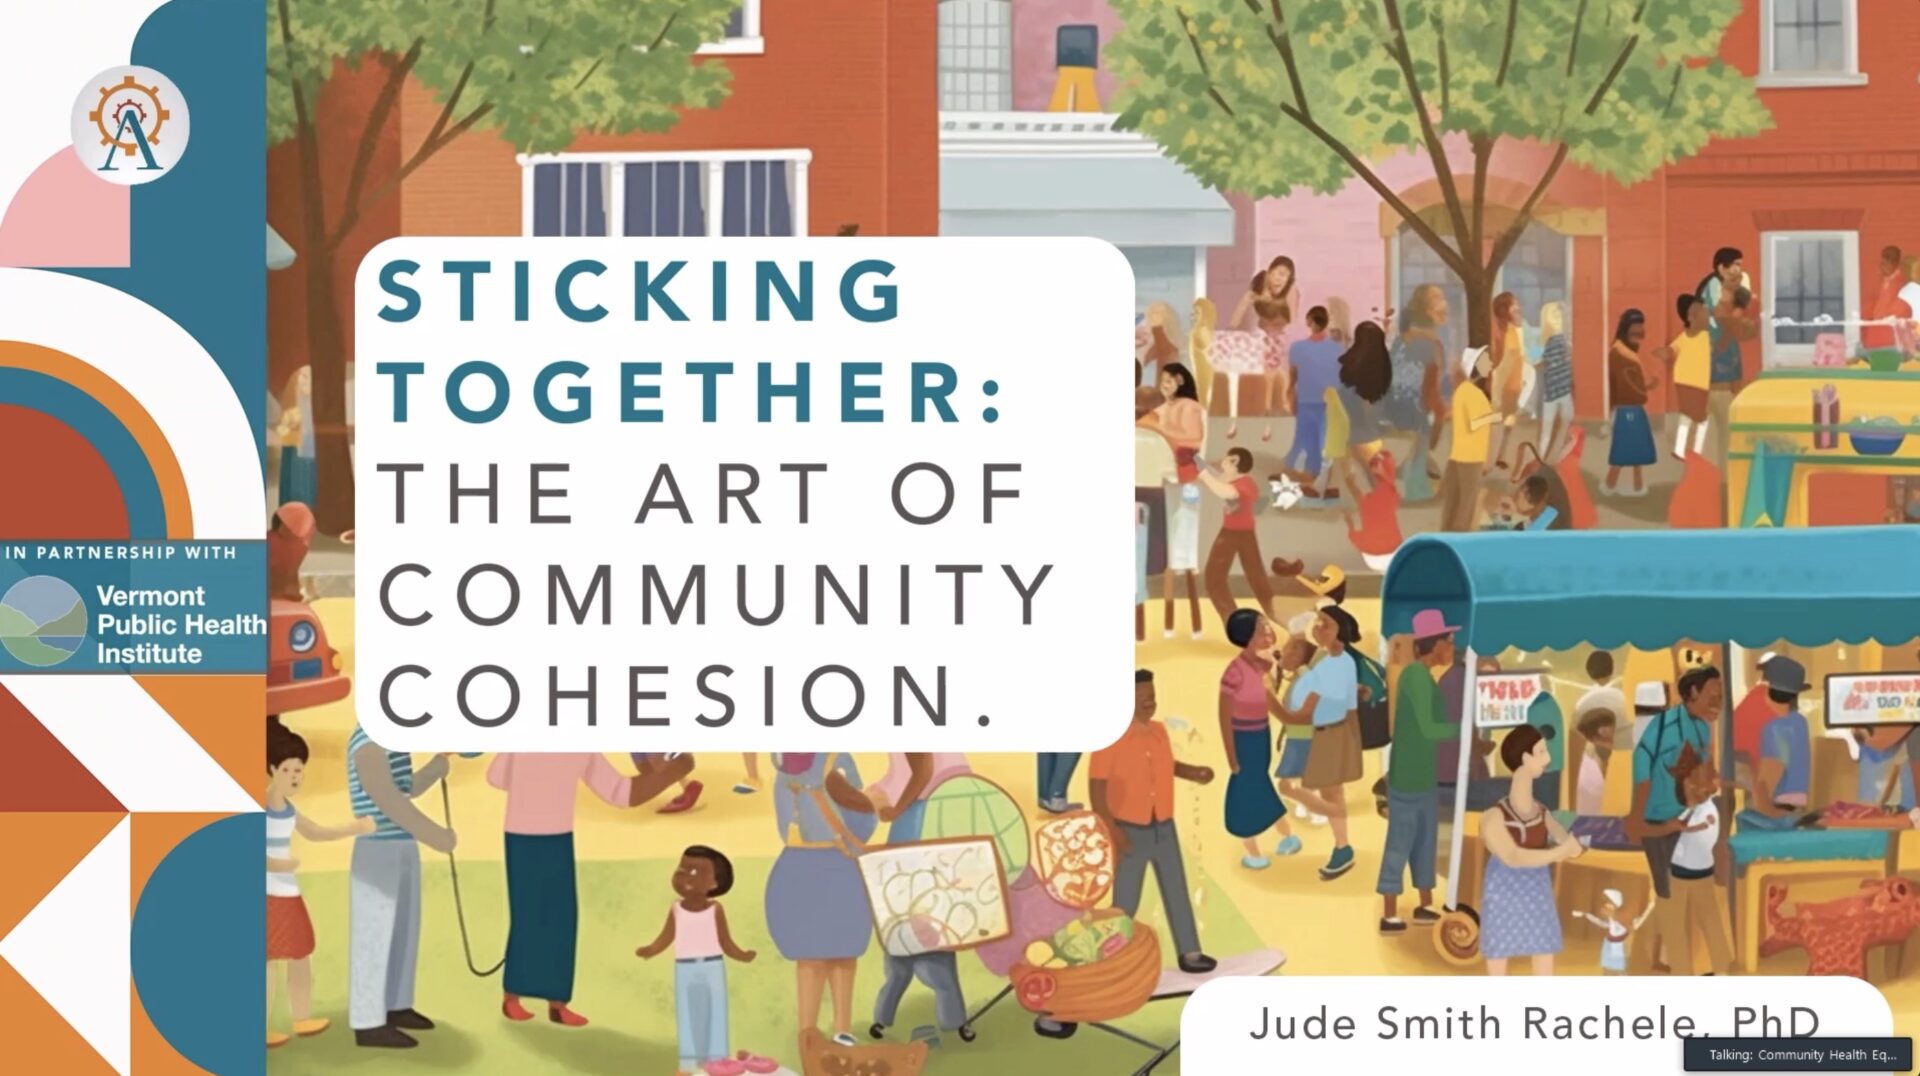 Sticking Together: The Art of Community Cohesion